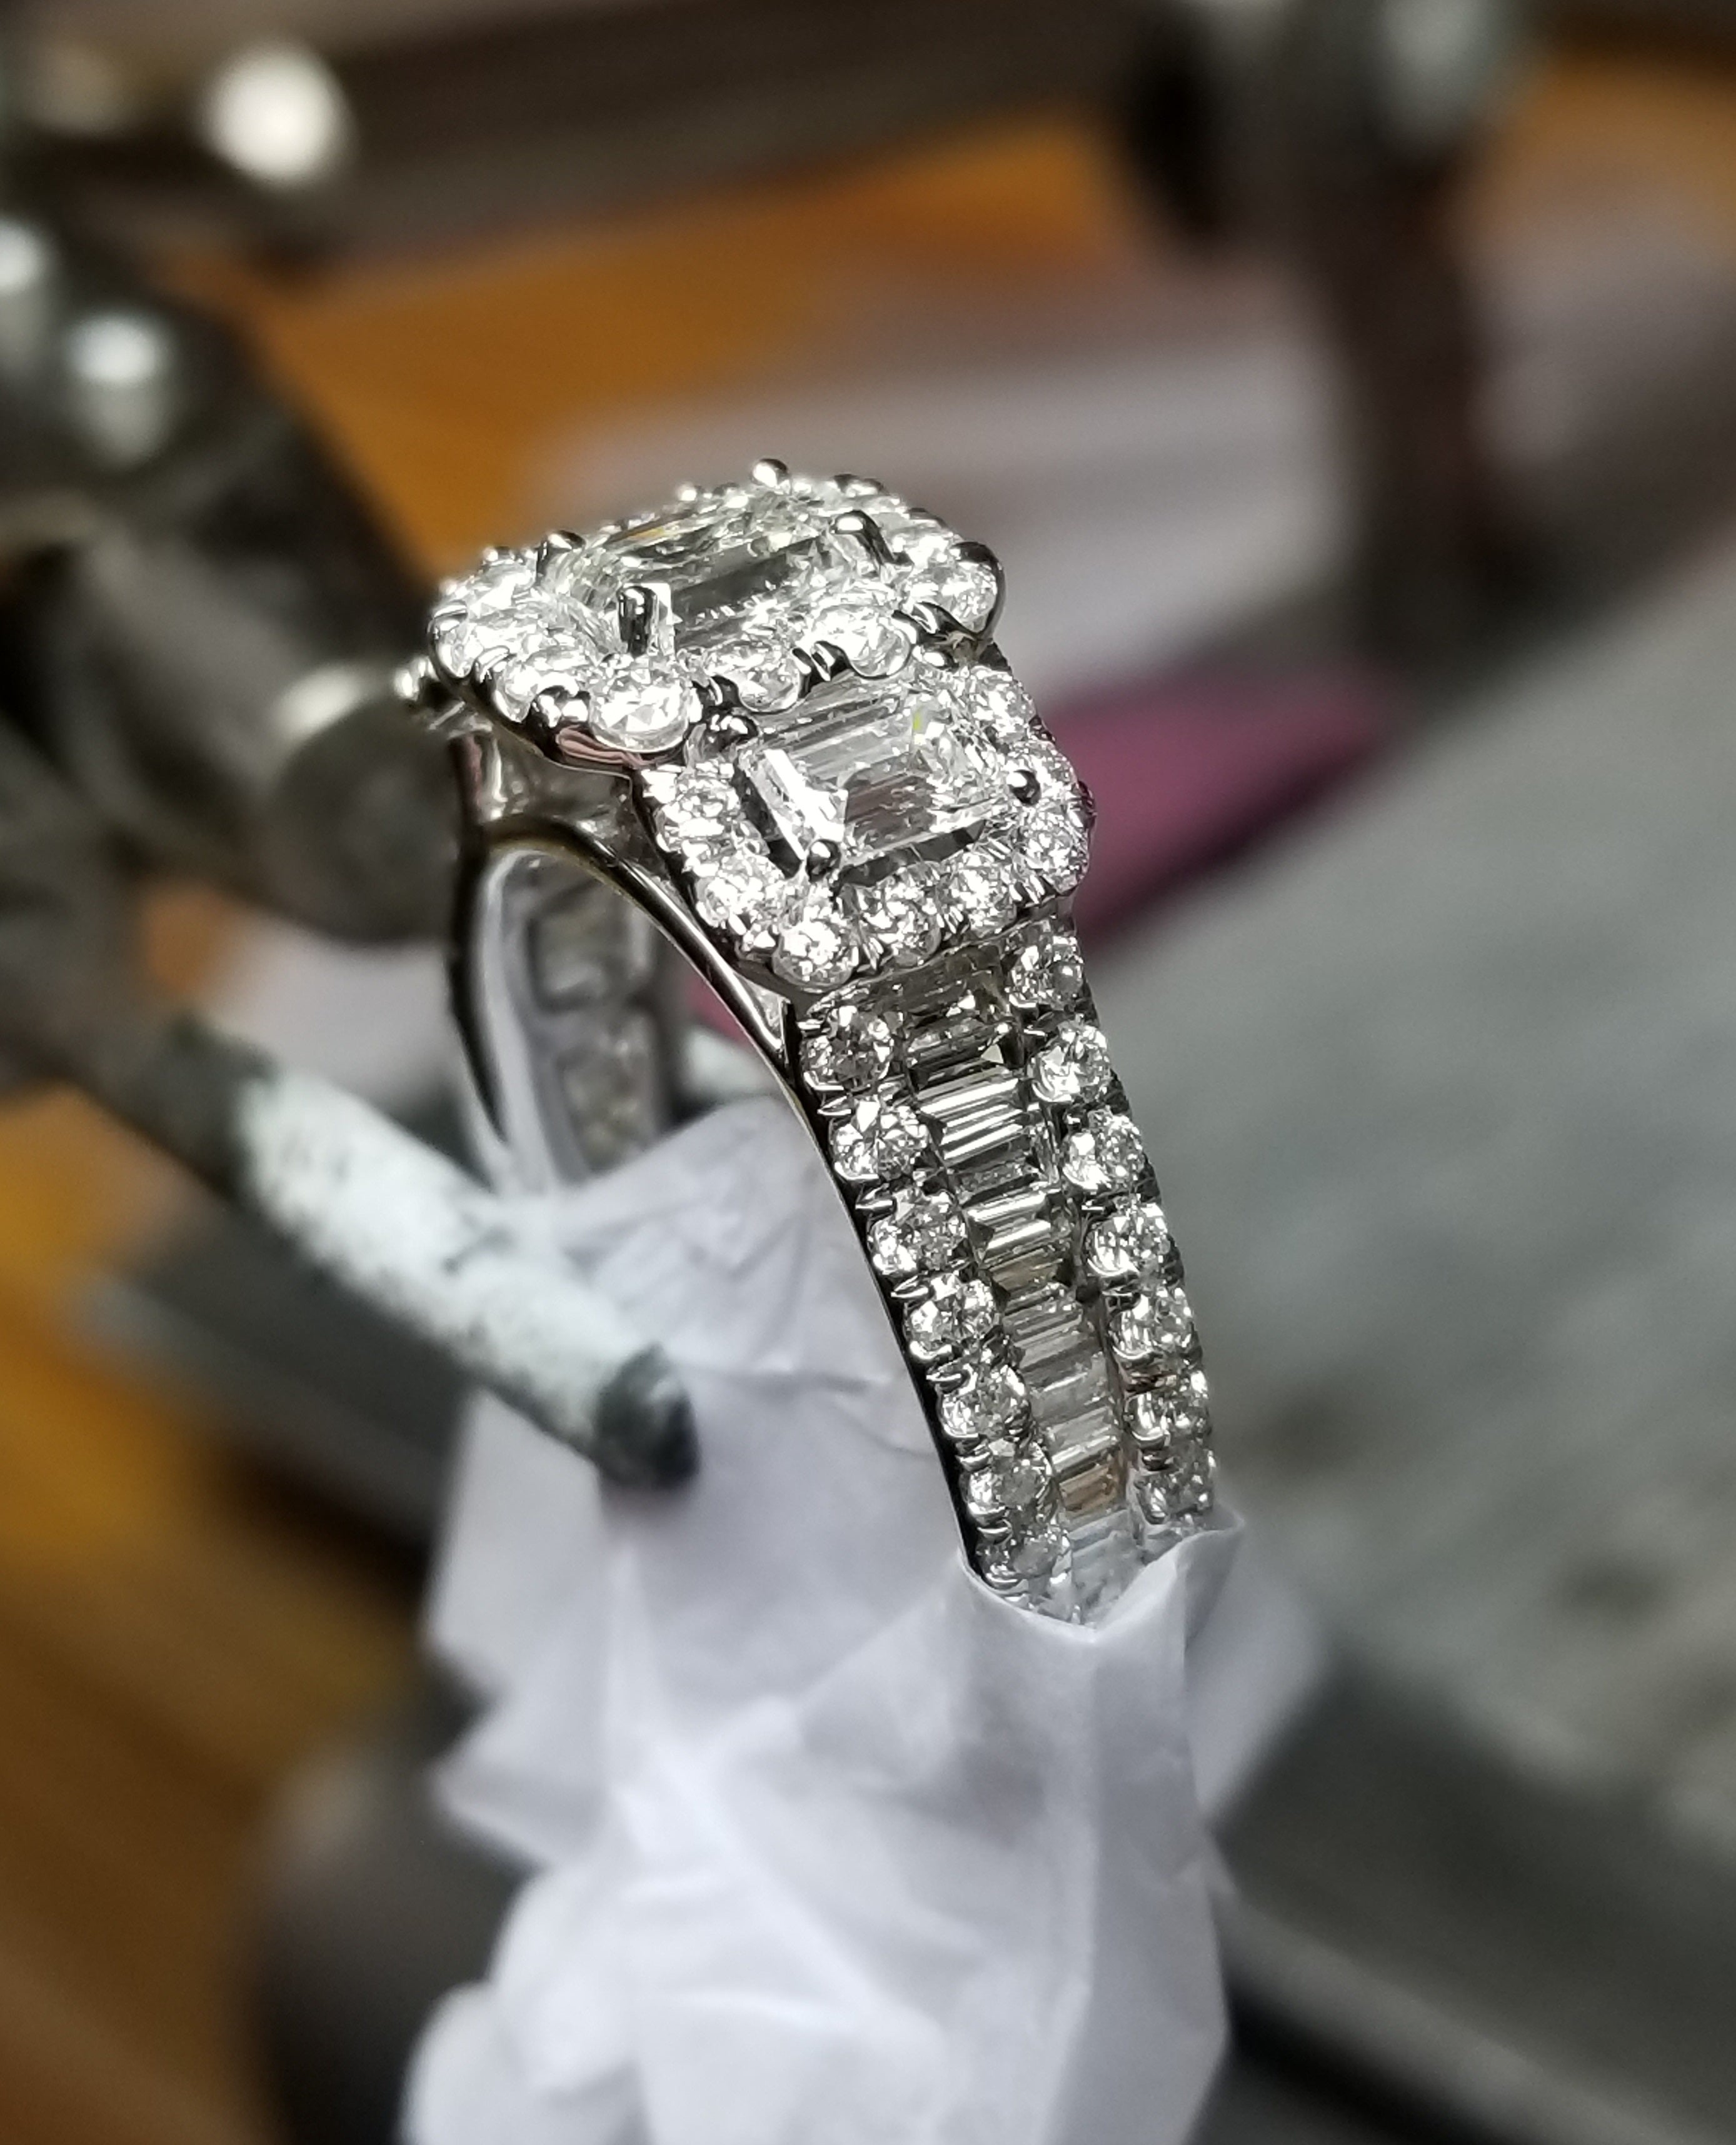 Tweezers holding up a beautiful step cut diamond ring with multiple stones.